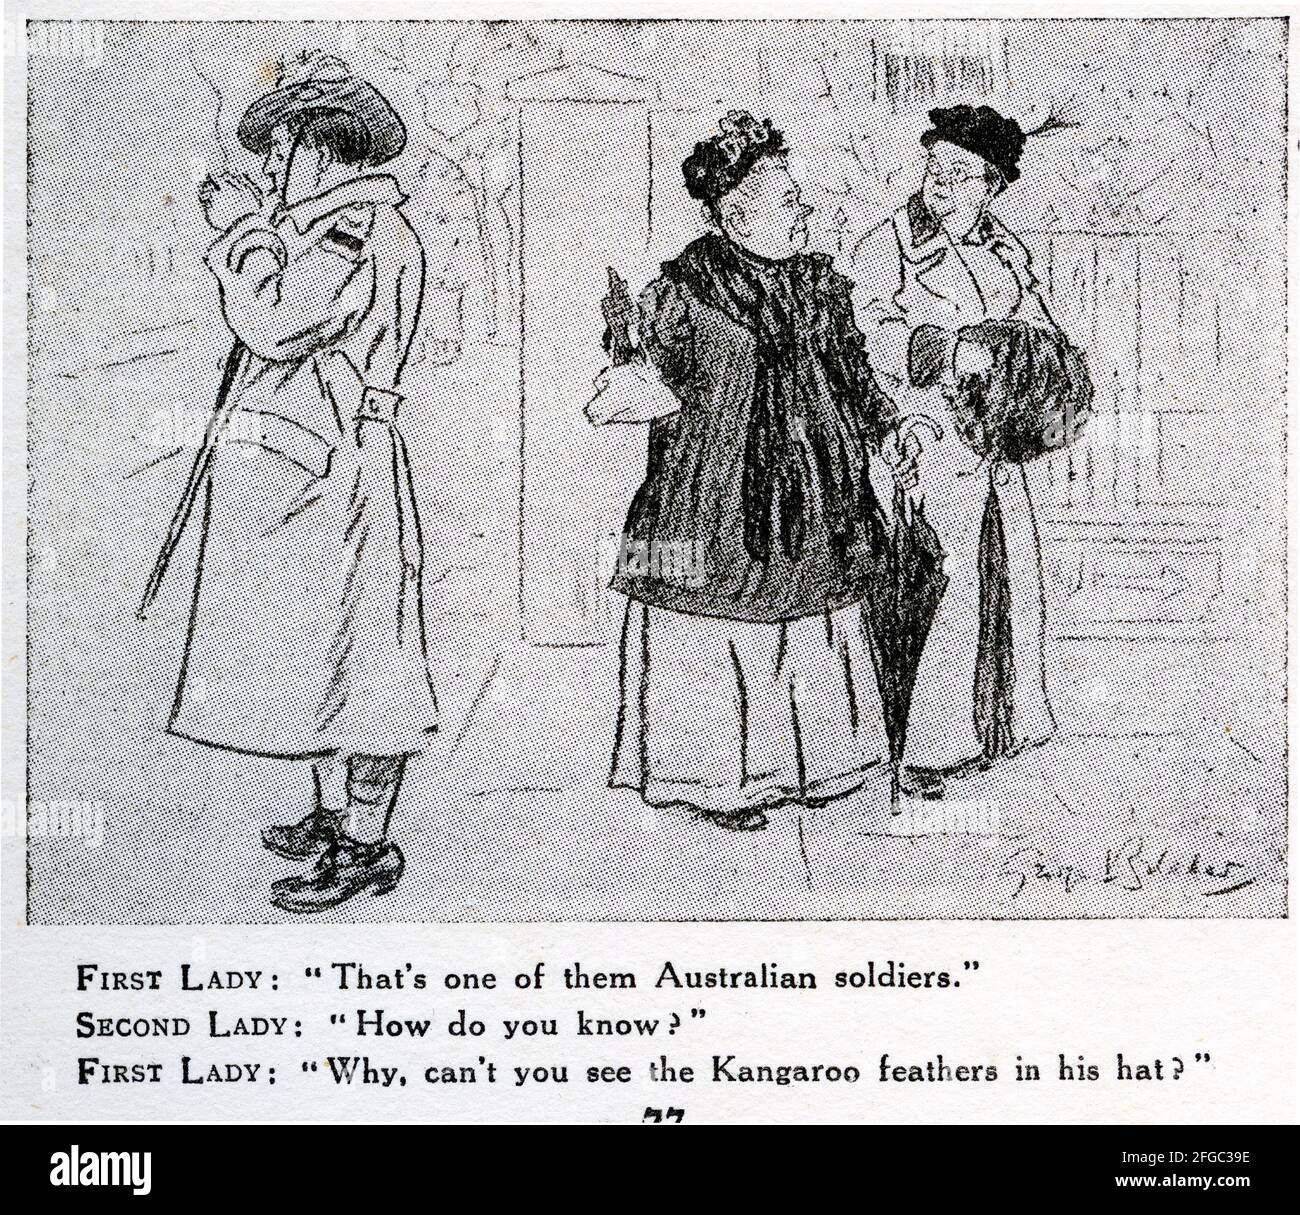 Kompliment Syd rødme Engraving of two women commenting about an Australian soldier wearing  kangaroo feathers in his hat during World War One. From Punch magazine  Stock Photo - Alamy